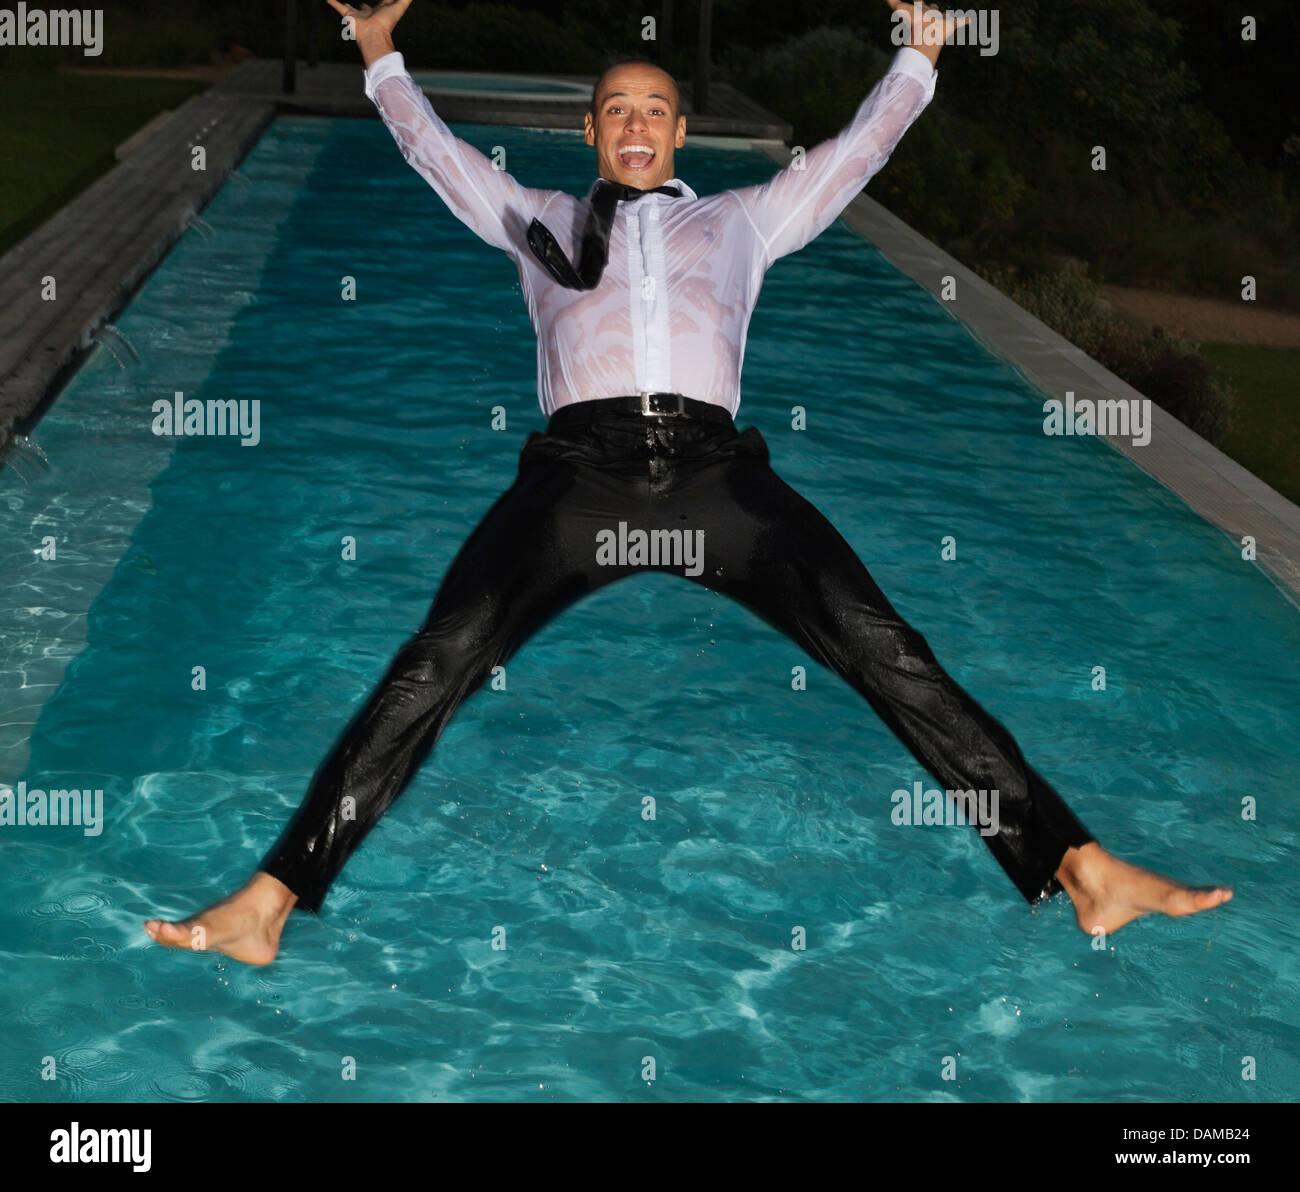 Toute habillée man jumping into swimming pool Banque D'Images